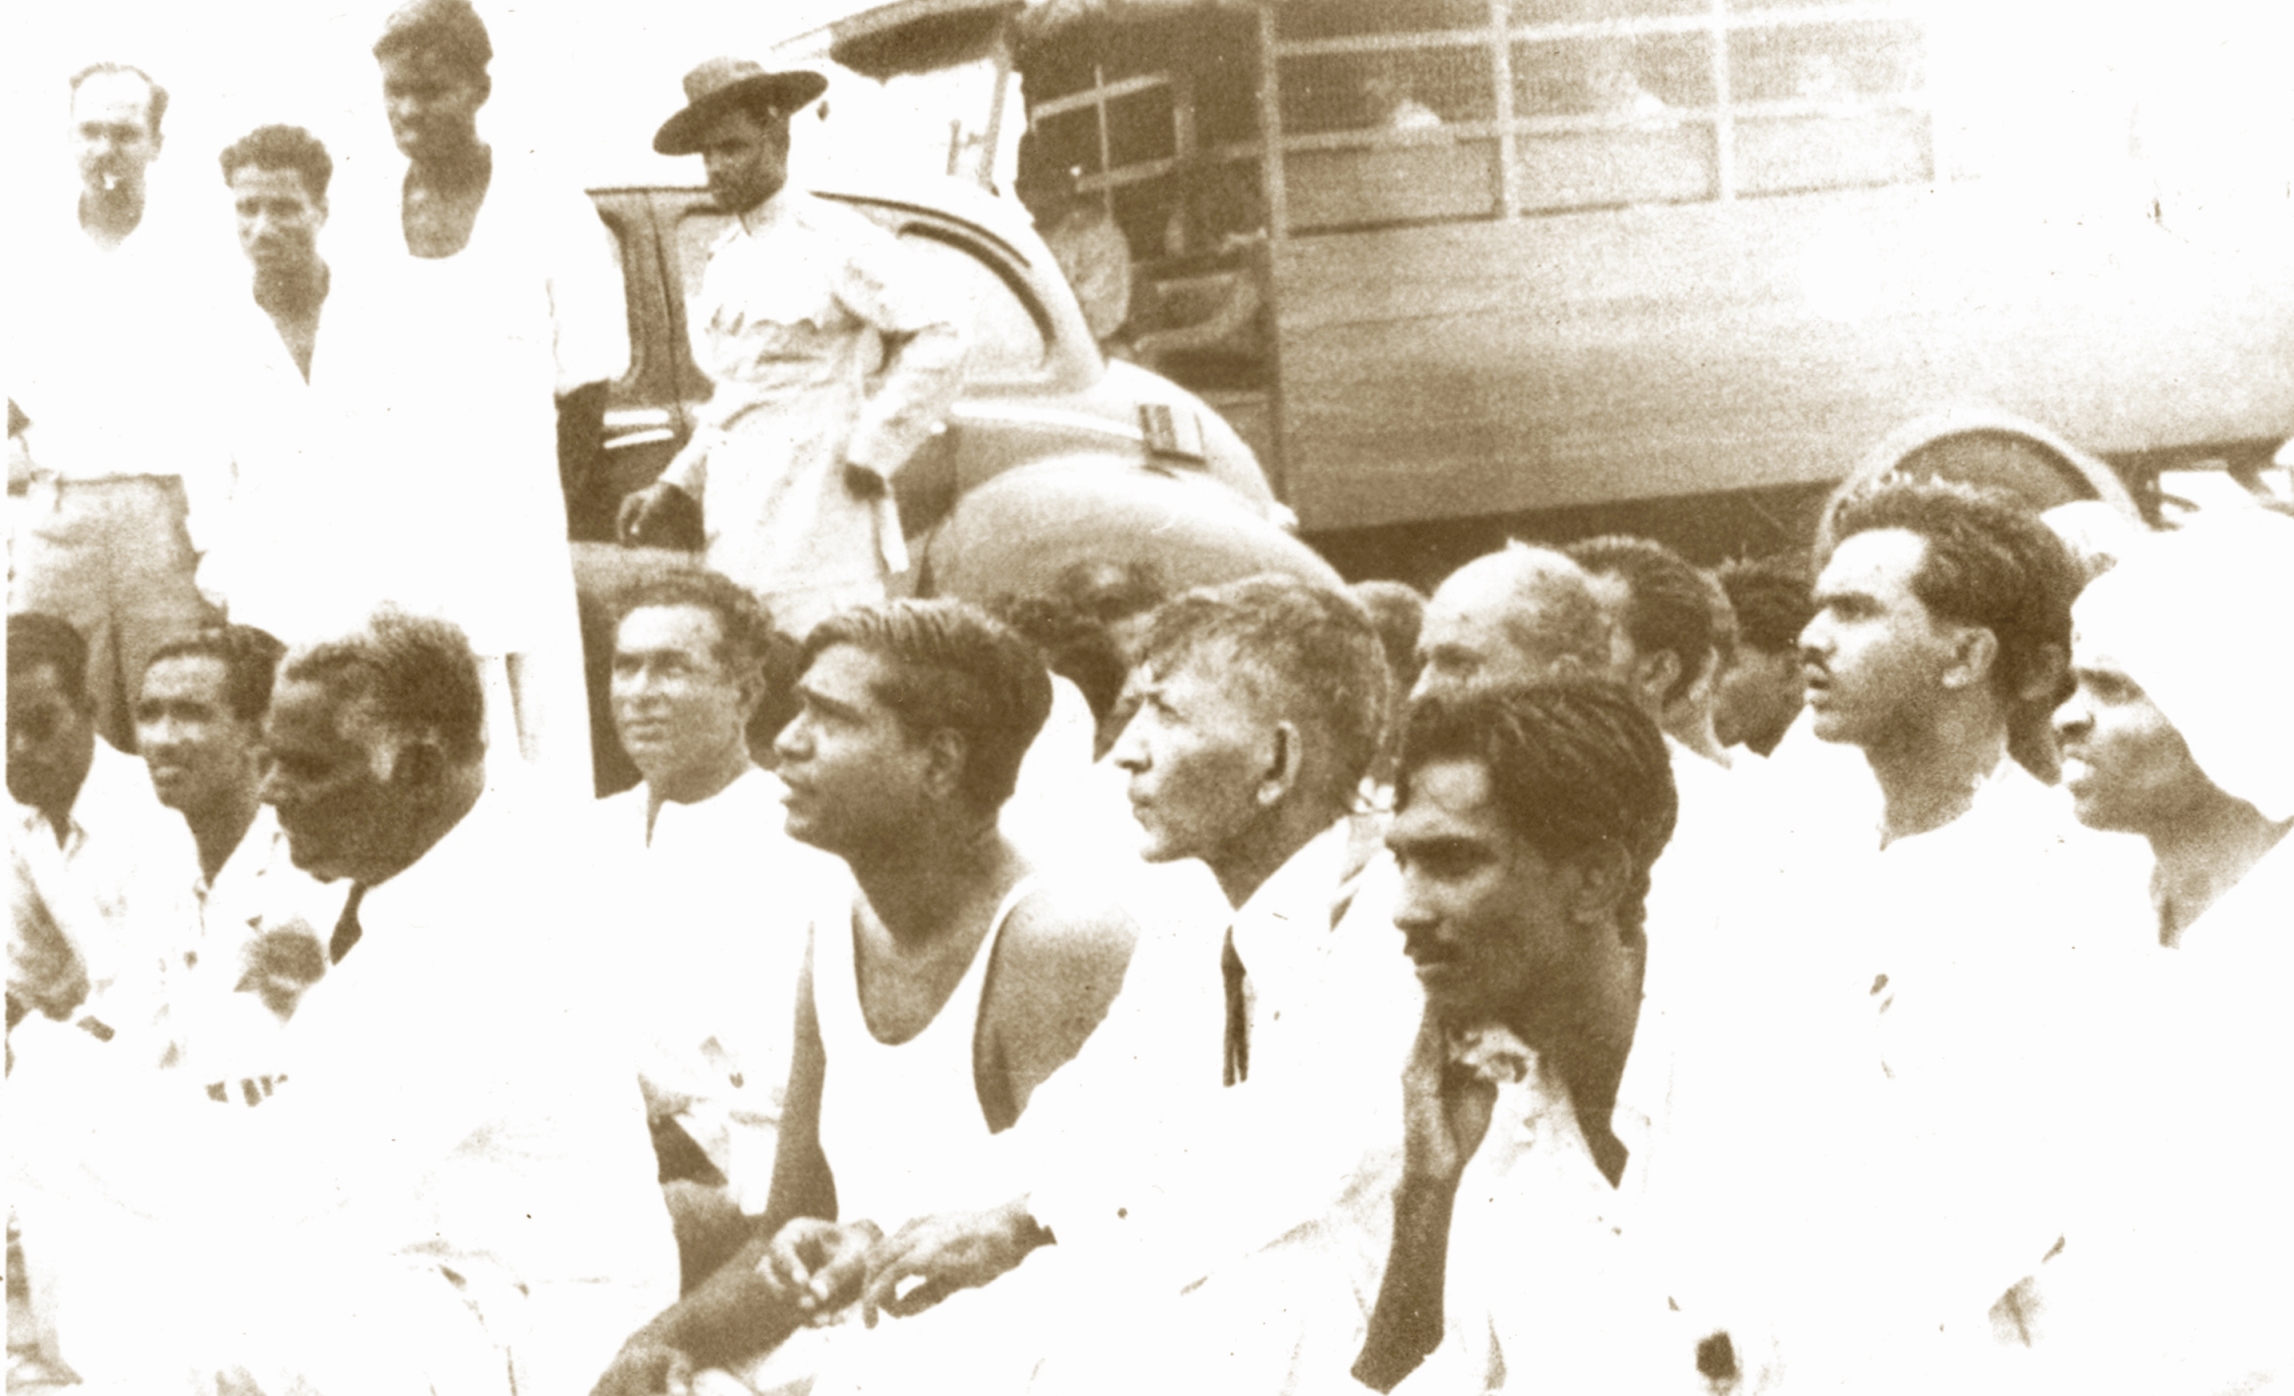 Chelvanayakam leads a protest against the Sinhala Only Act of 1956.